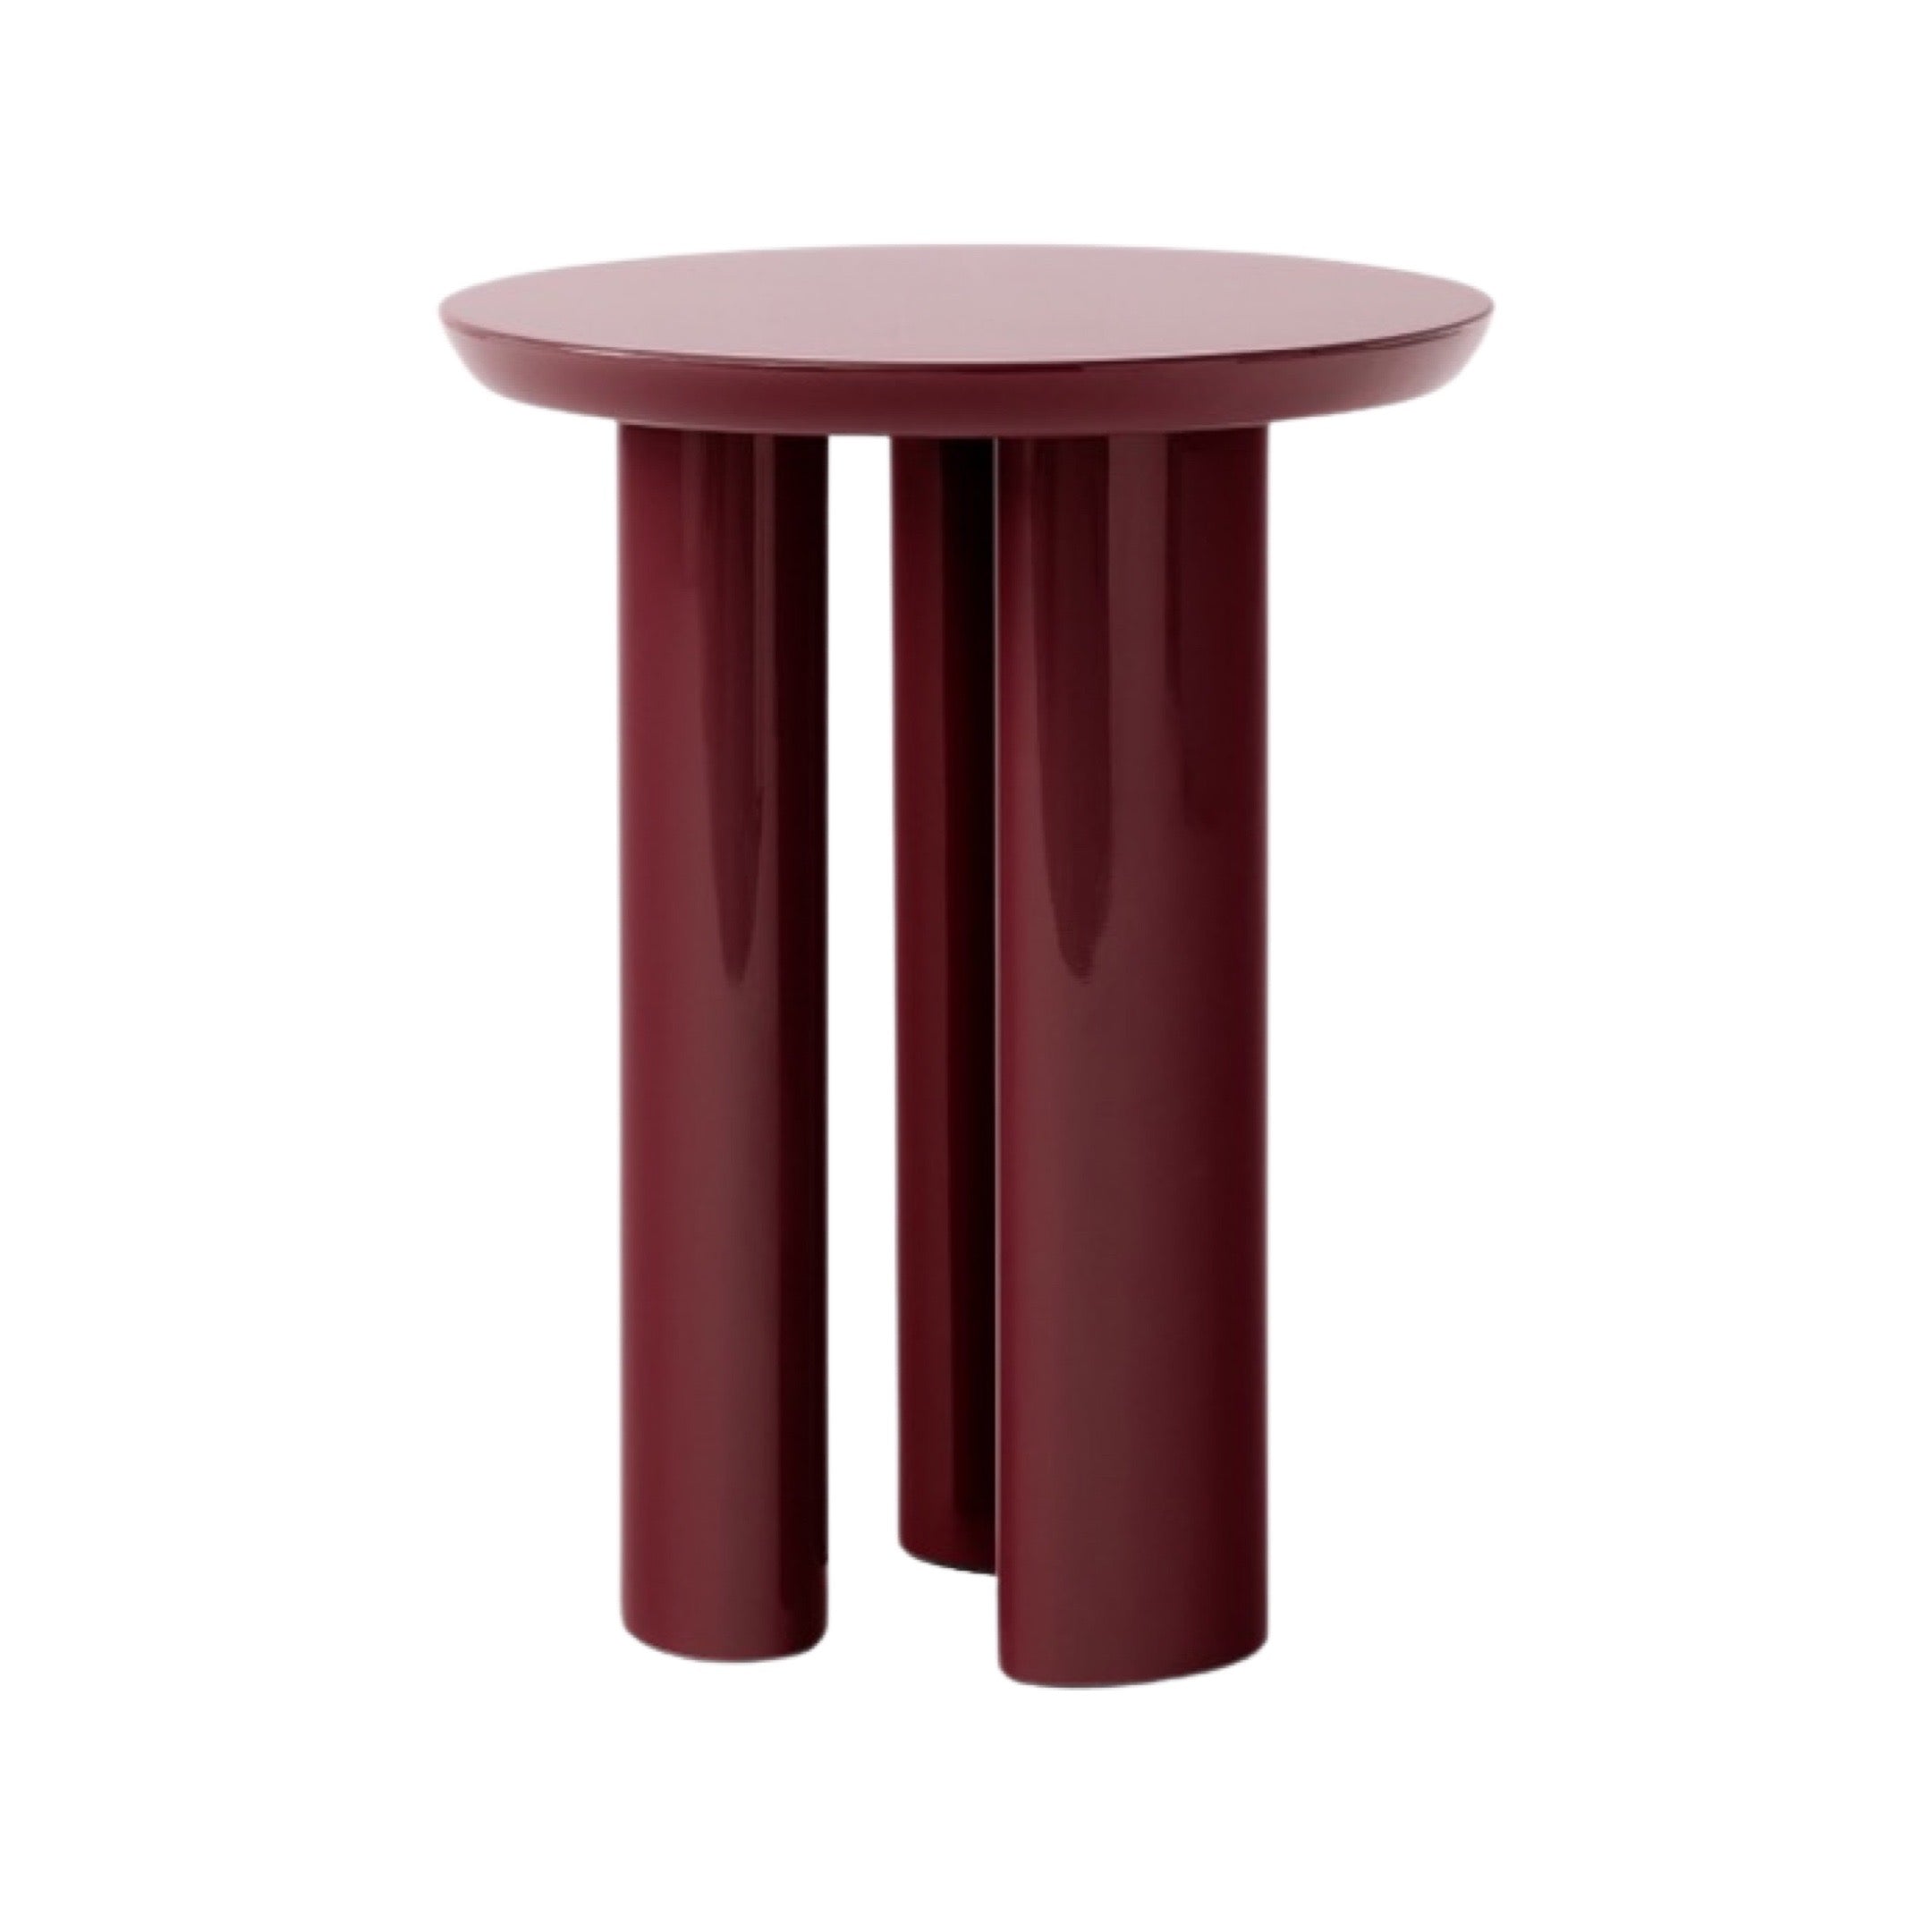 &Tradition Tung Side Table